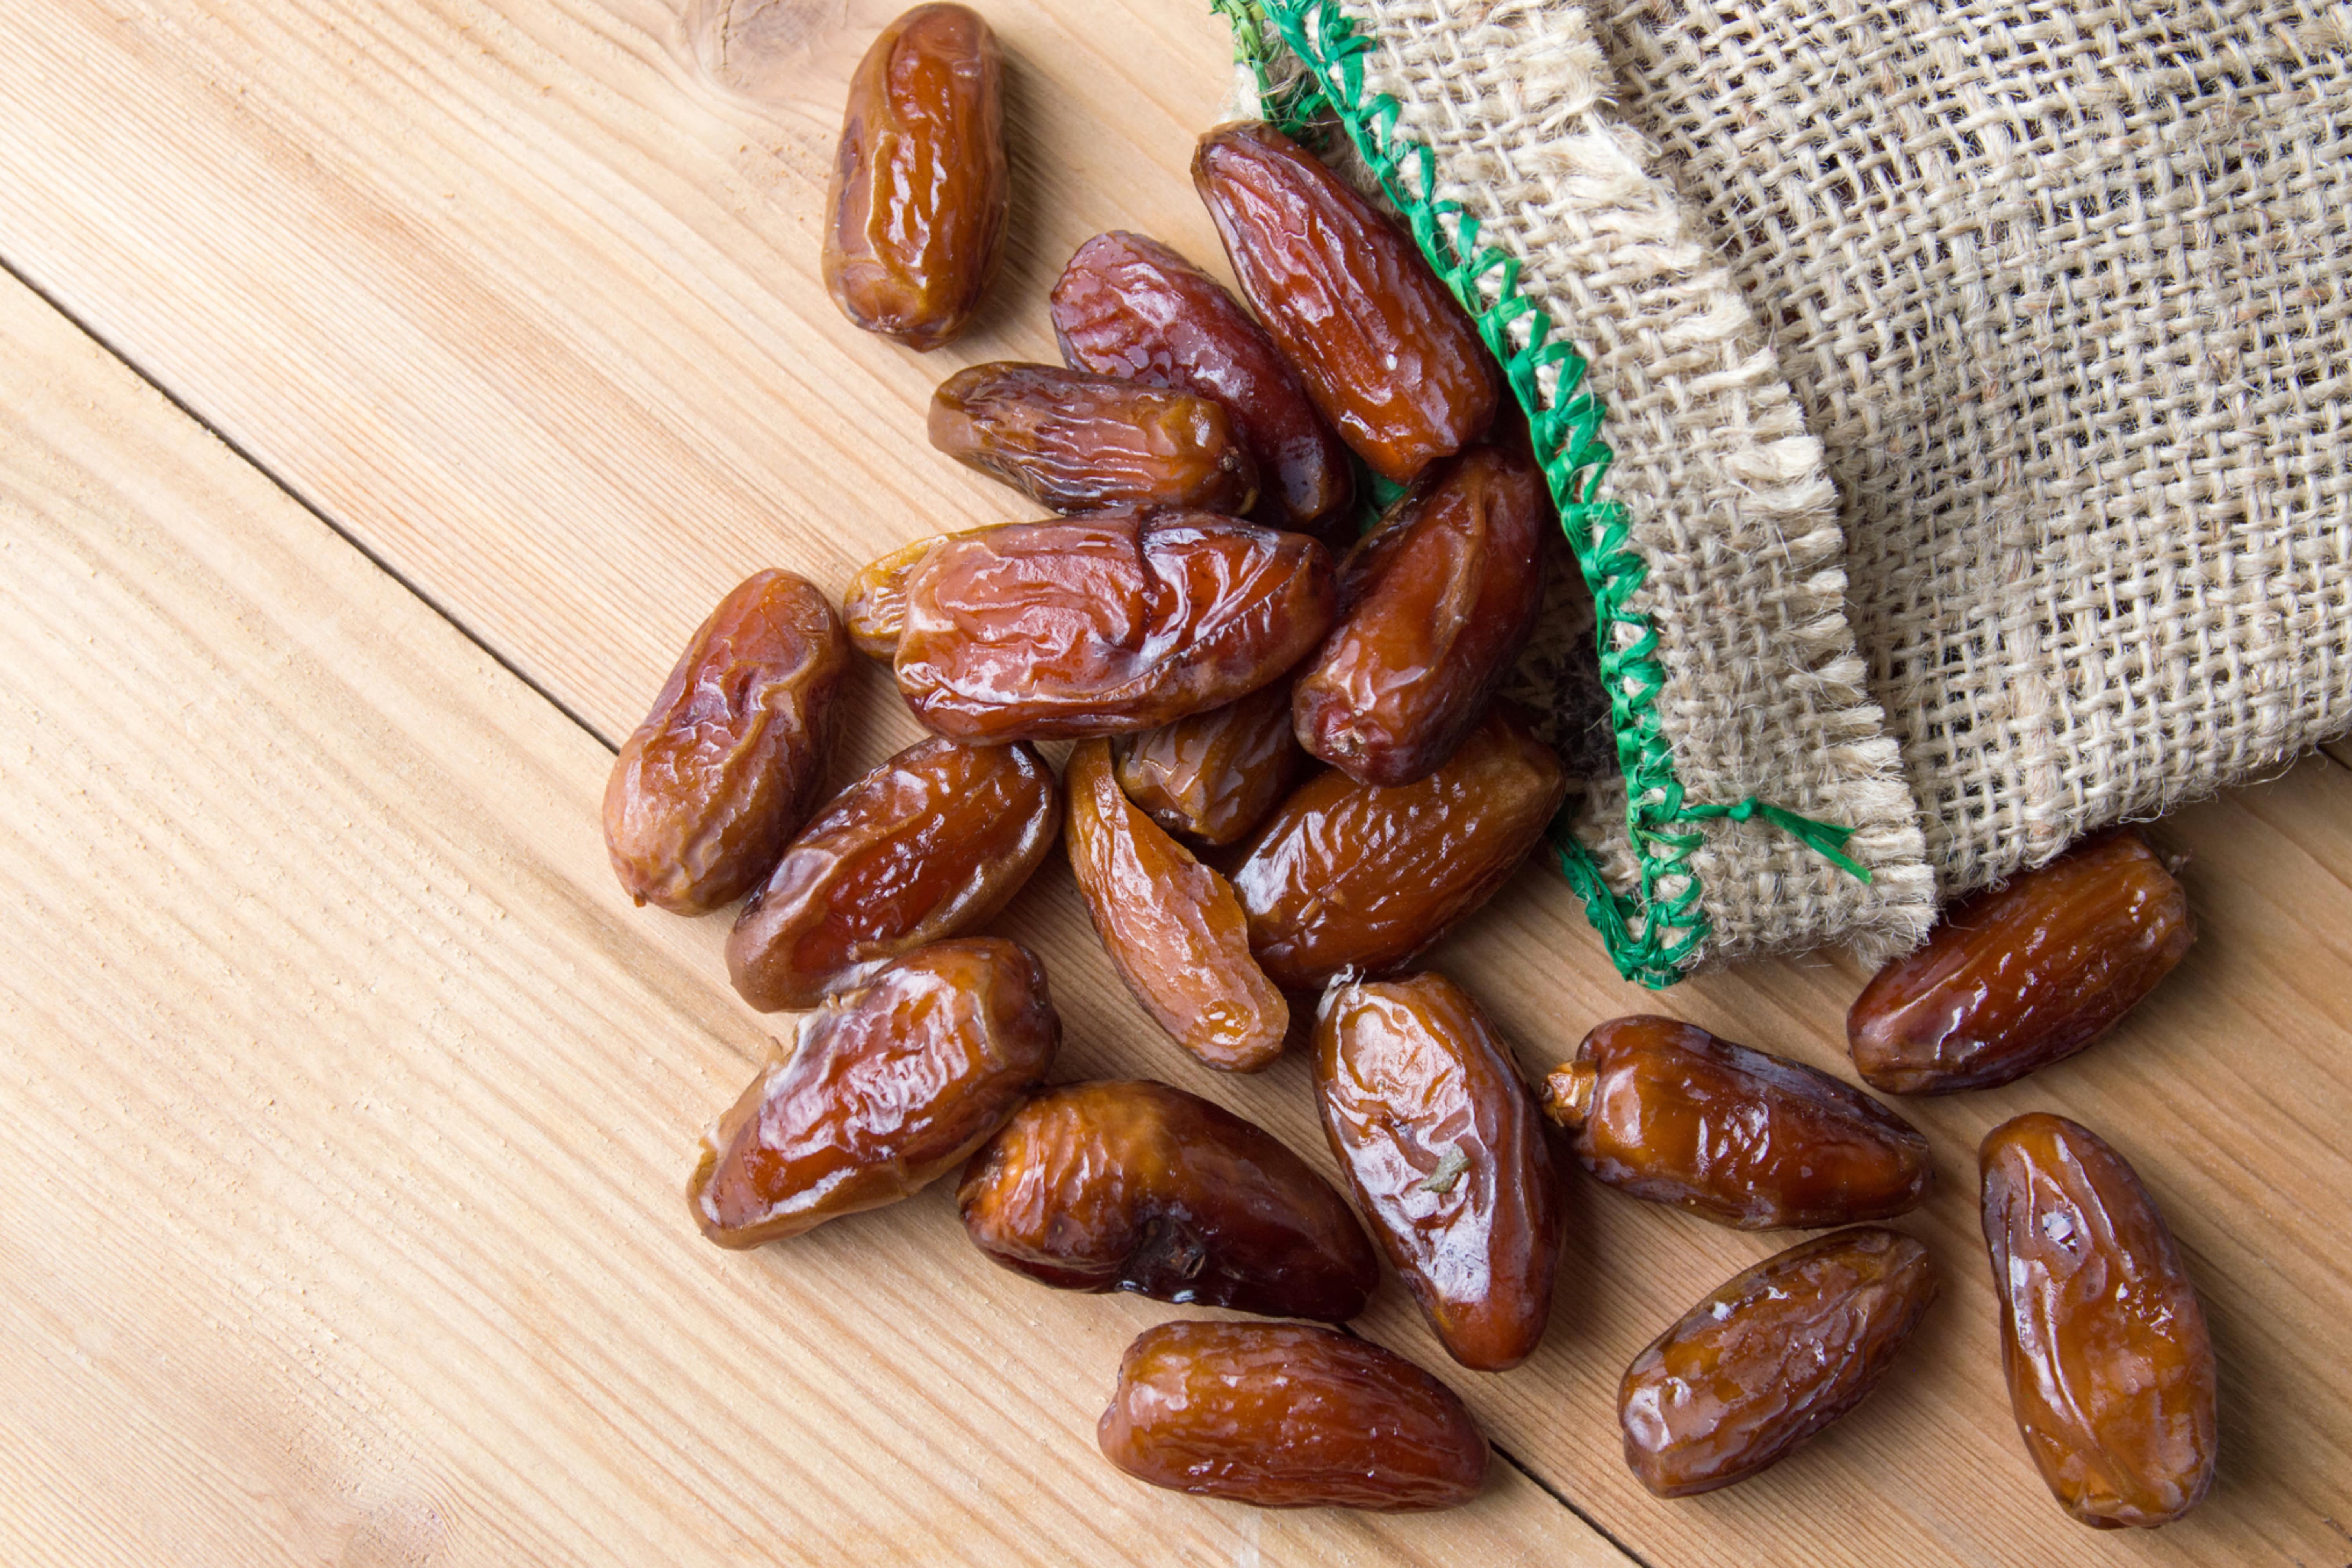 Three Reasons Why Dates Are a Superfood